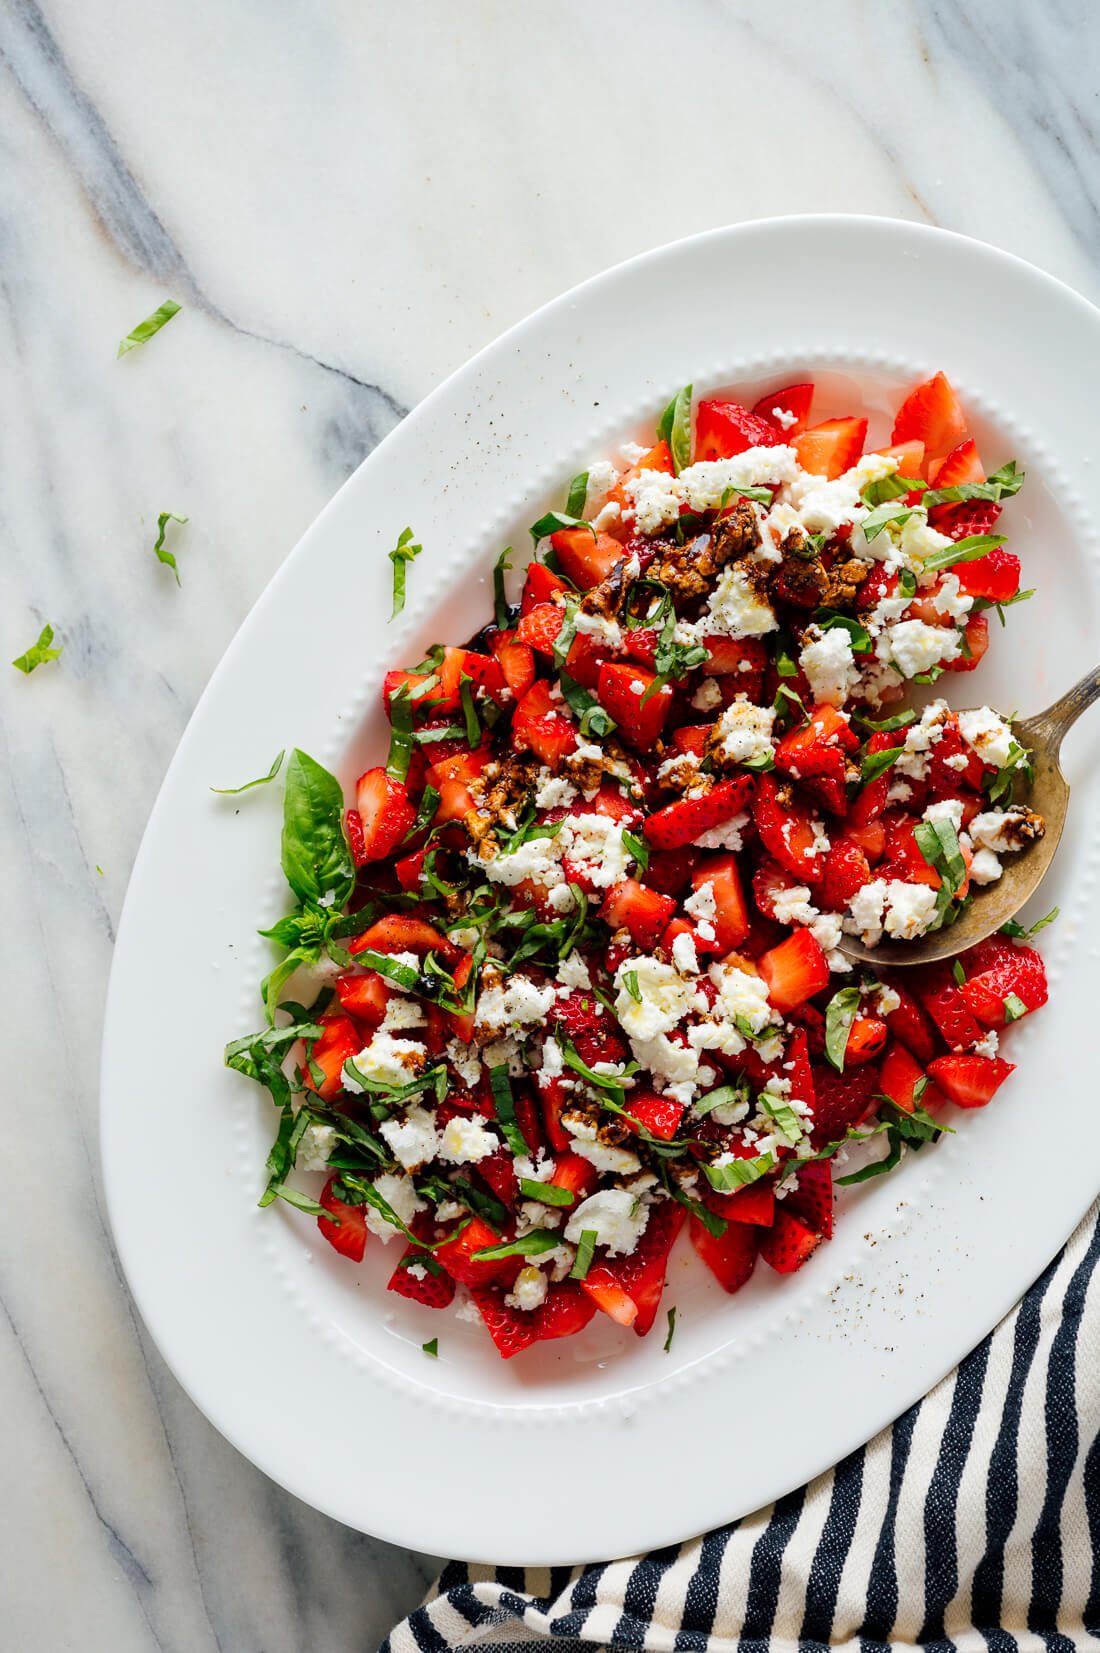 Strawberry, Basil and Goat Cheese Salad with Balsamic Drizzle